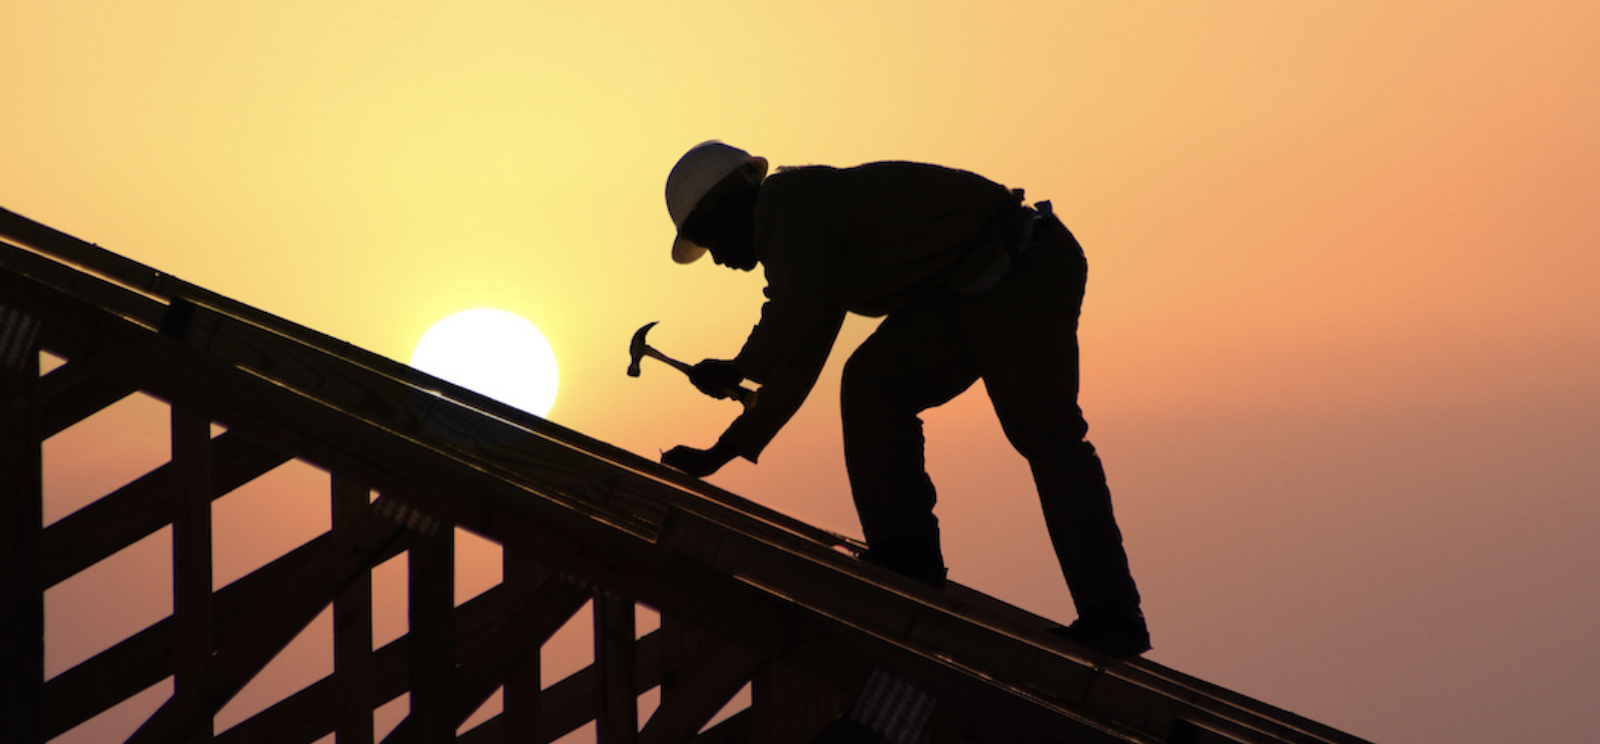 Man using hammer building home roof at dawn